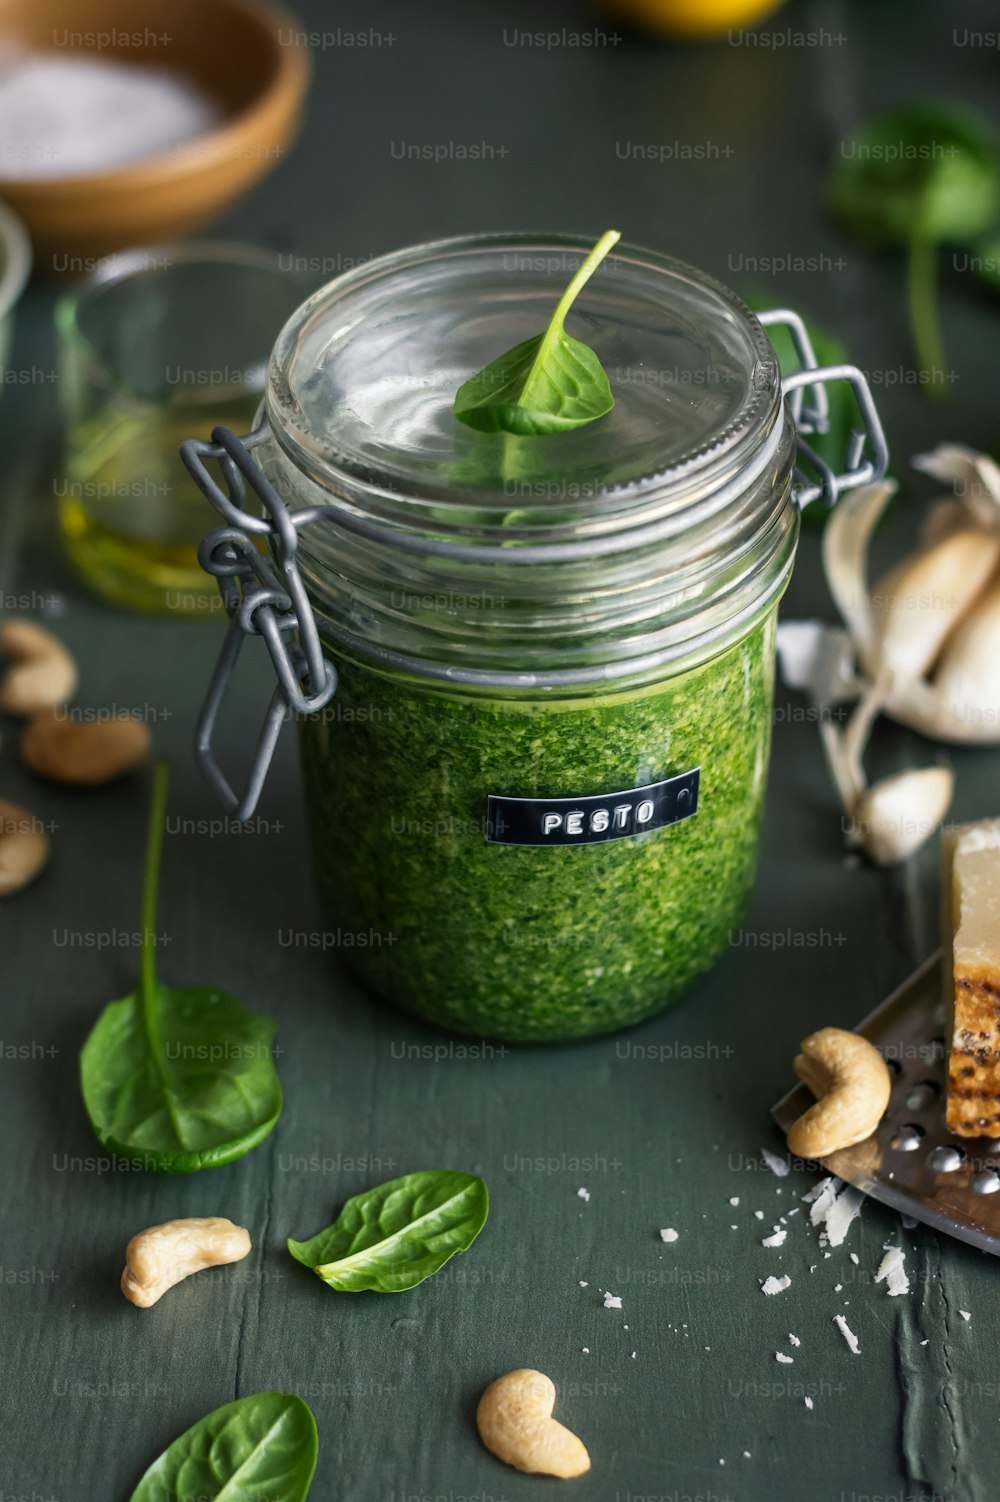 a jar filled with green food next to a slice of cake